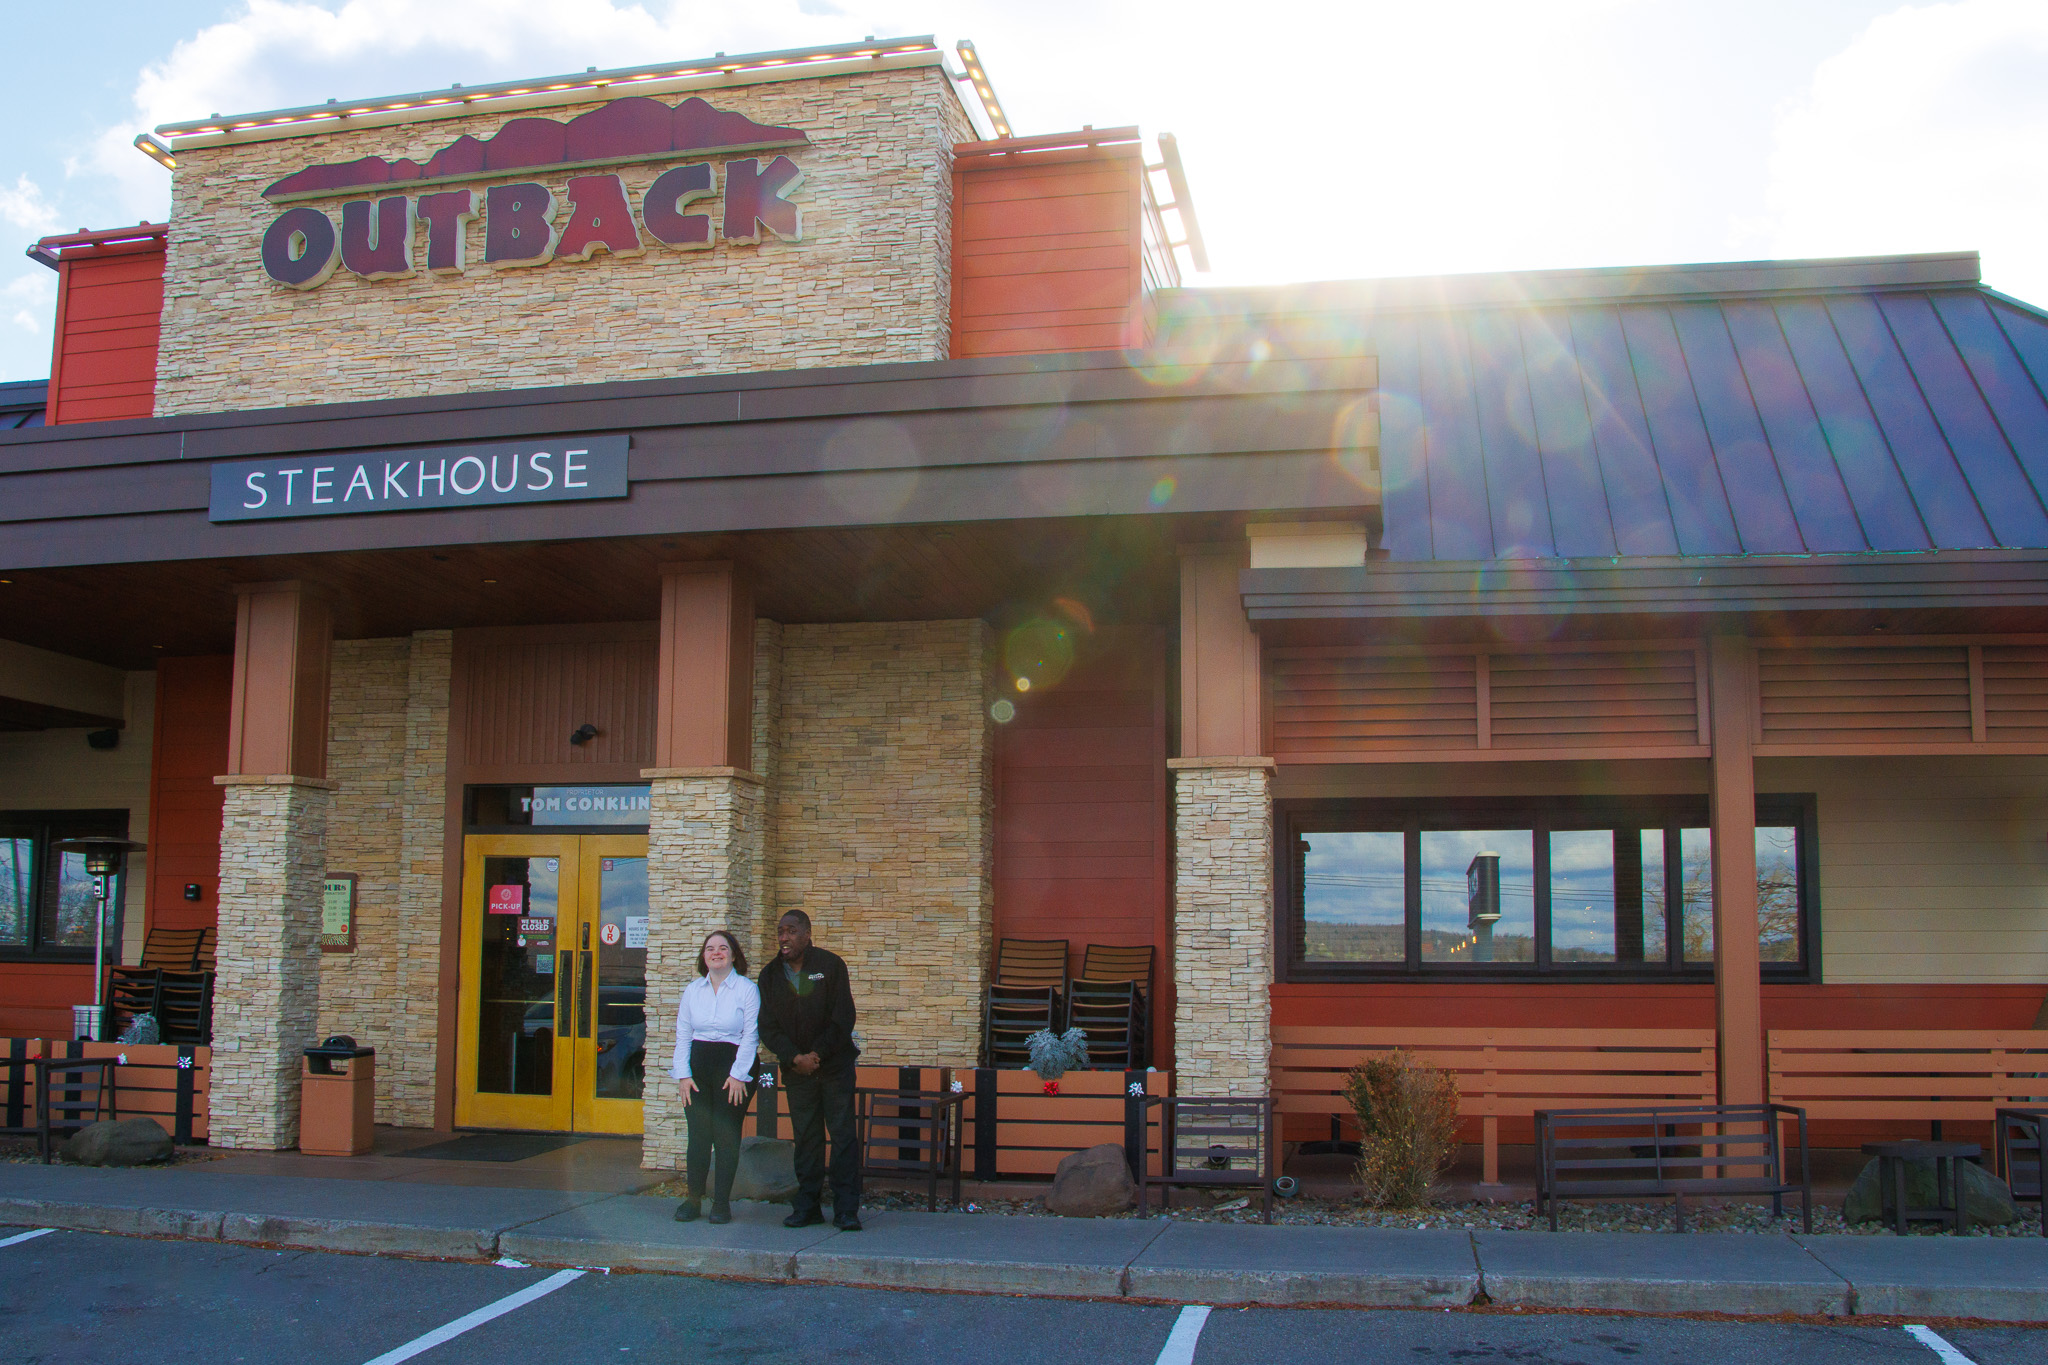 upported Employment at Outback Steakhouse in Binghamton, NY.